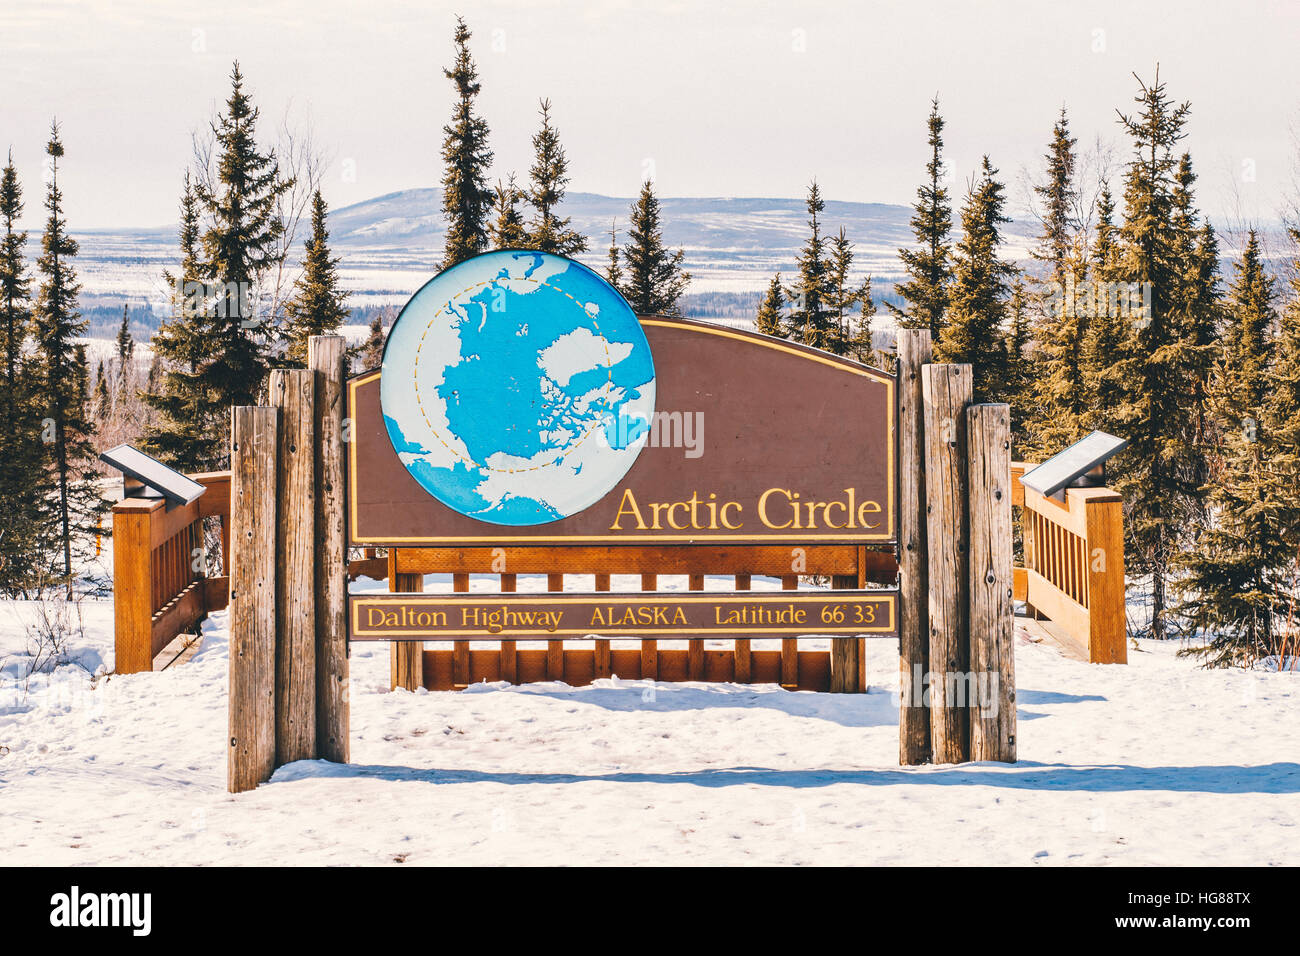 Dalton highway with Arctic Circle sign during winter Stock Photo